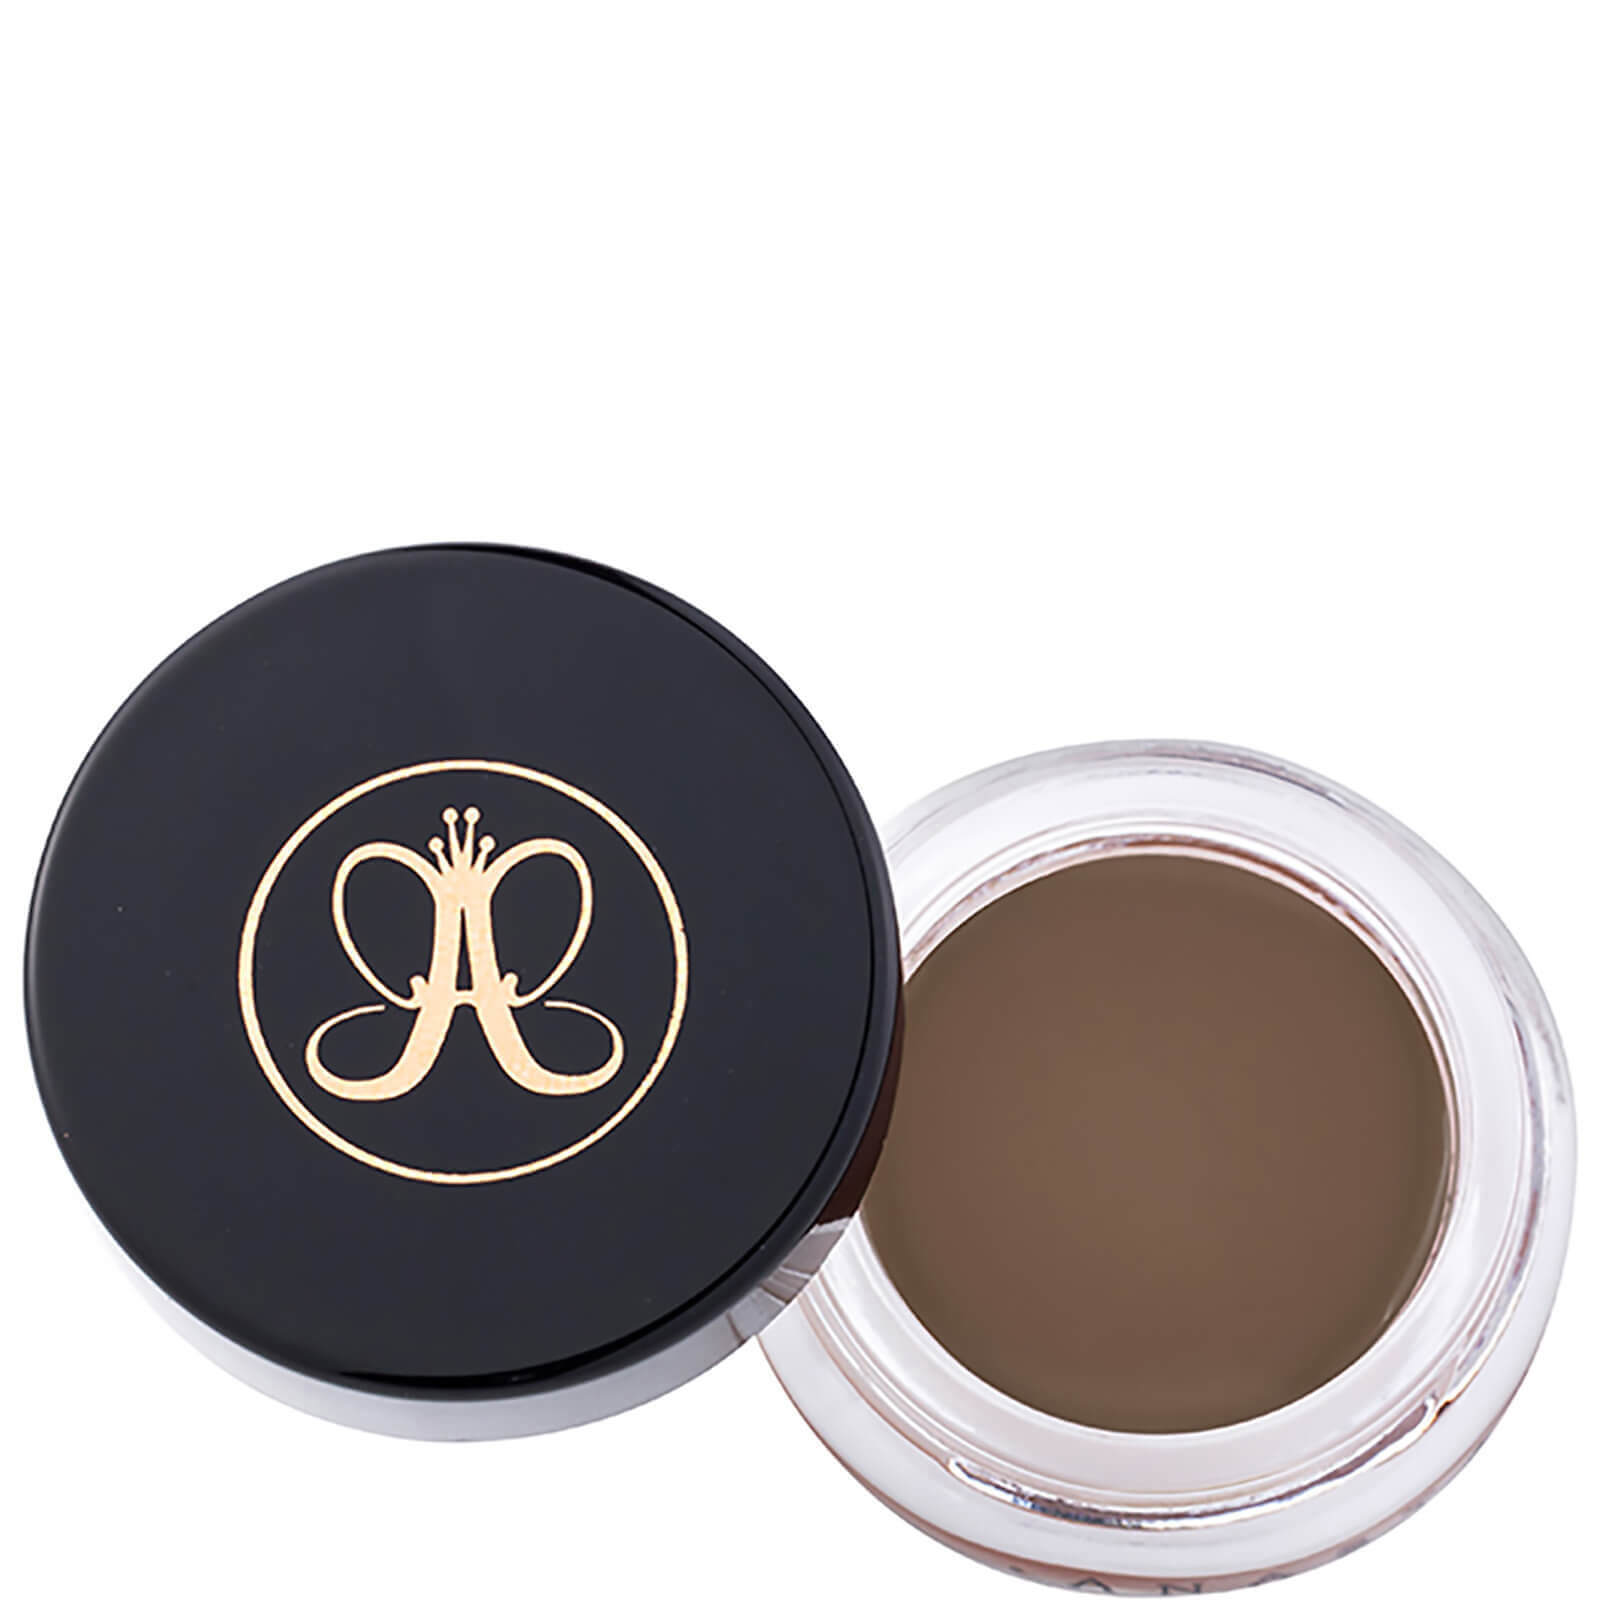 Anastasia Beverly Hills Dipbrow Pomade 4.0g (Various Shades) - Soft Brown